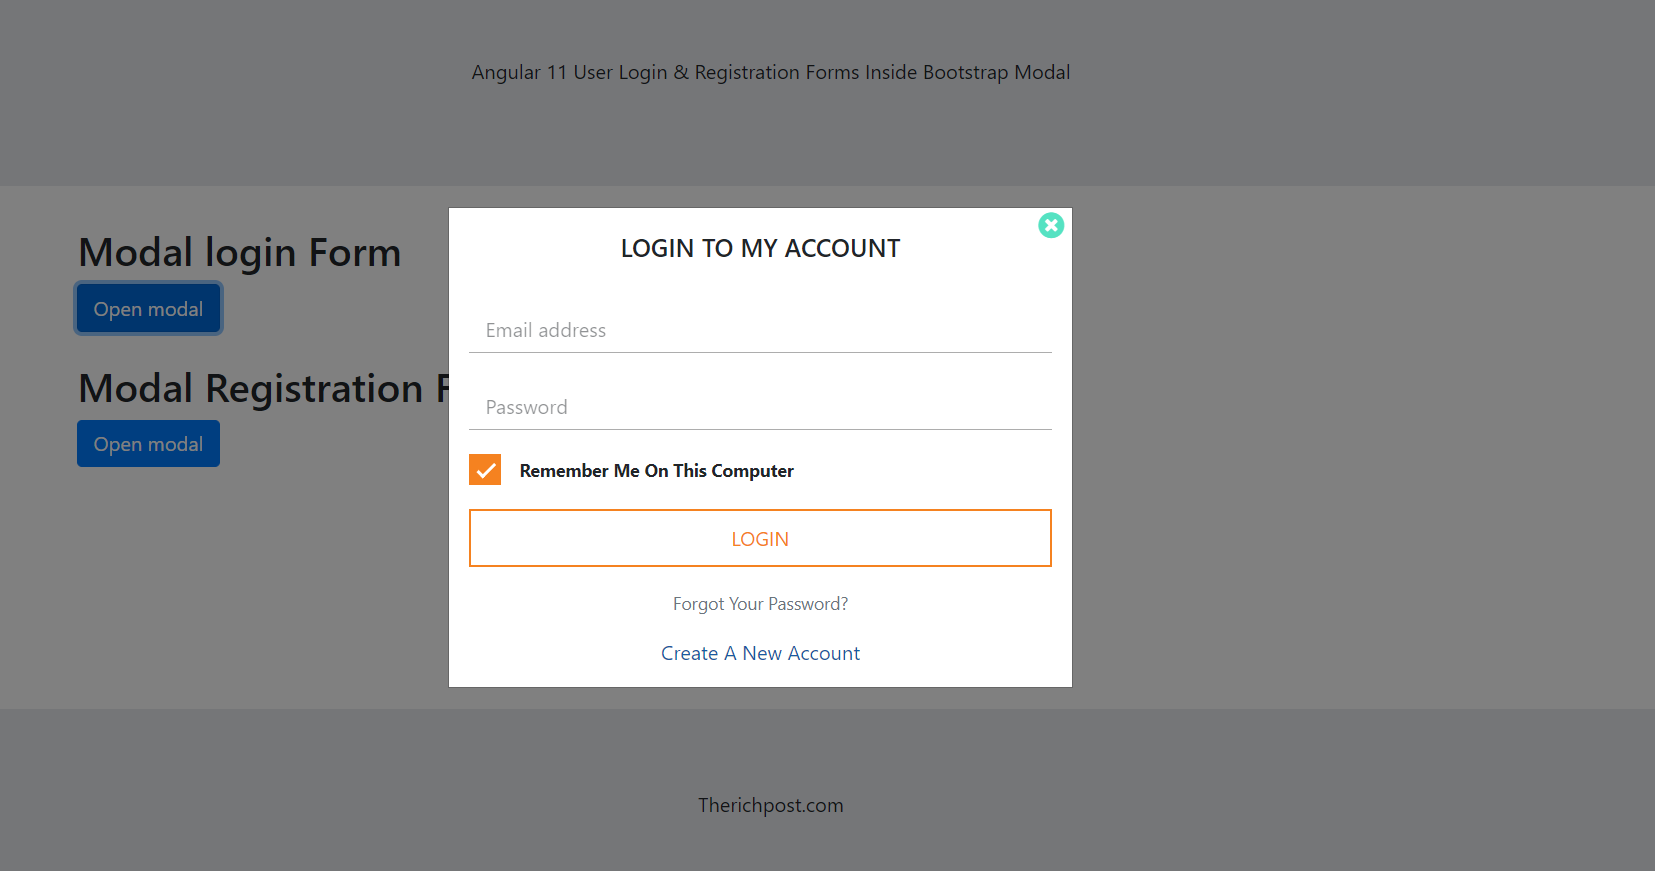 Reactjs Login & Registration Forms inside Bootstrap Modal - Therichpost